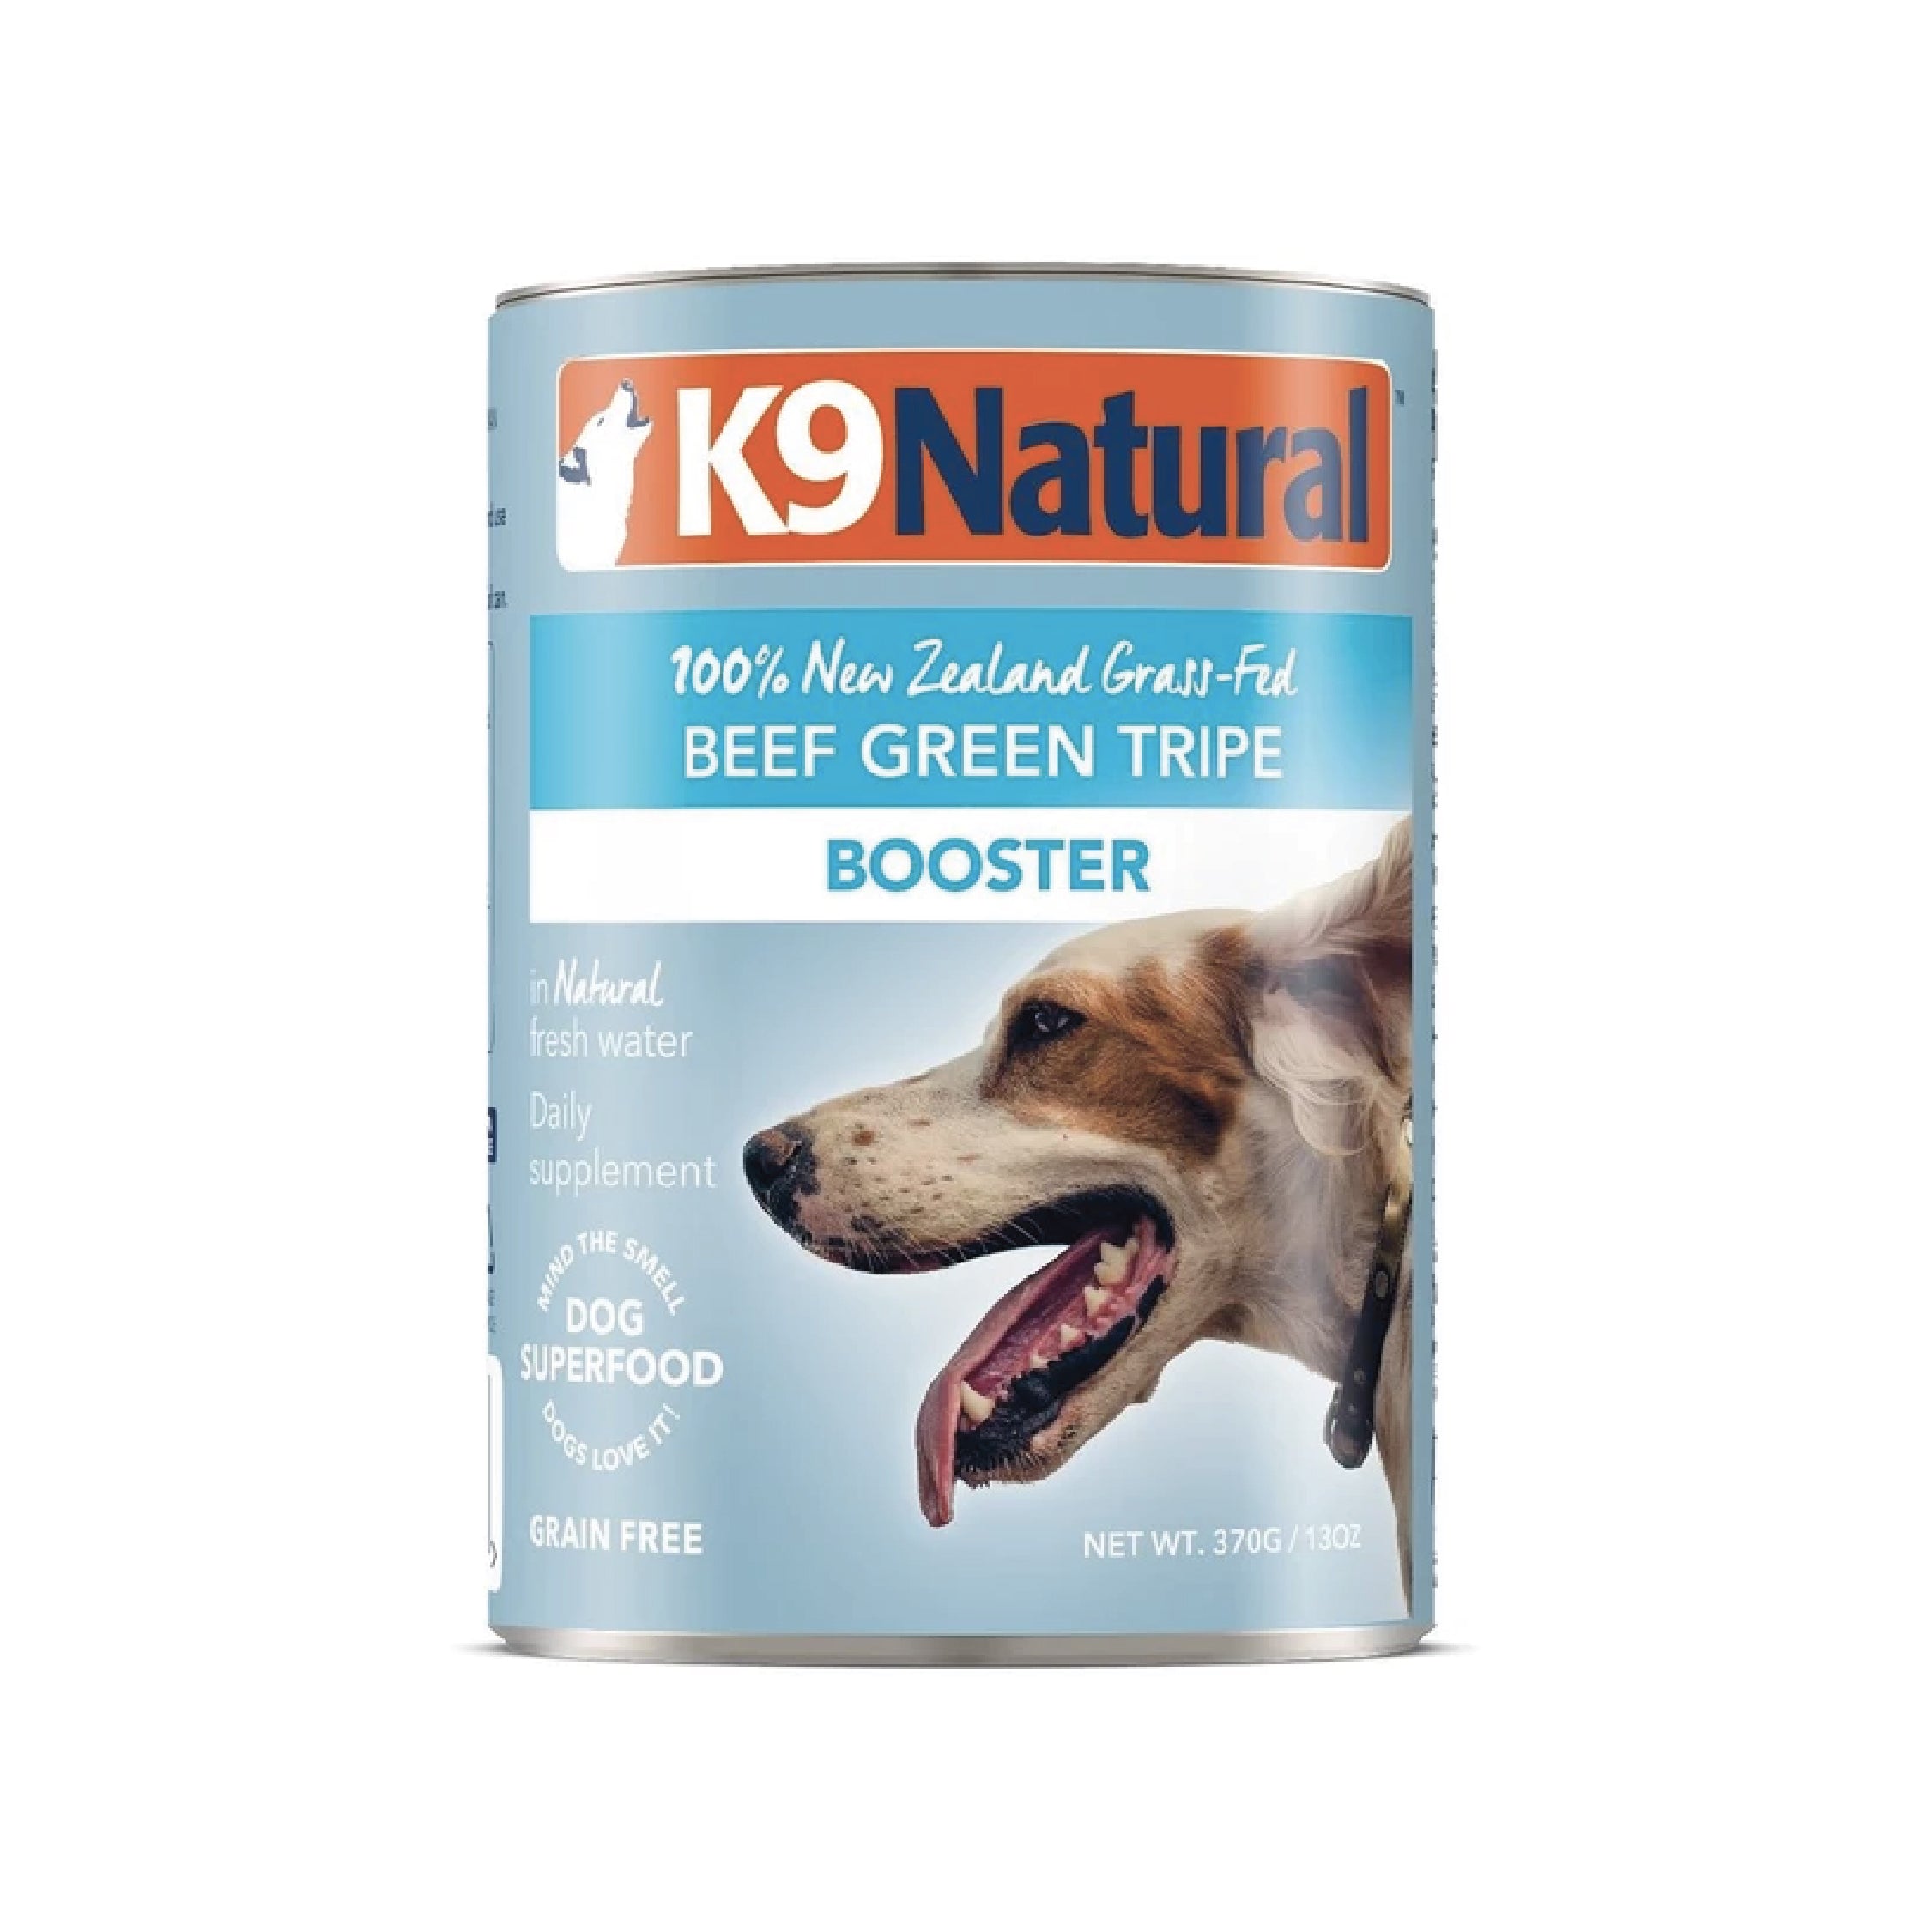 K9 Natural Beef Green Tripe Booster Grain-Free Canned Dog Food